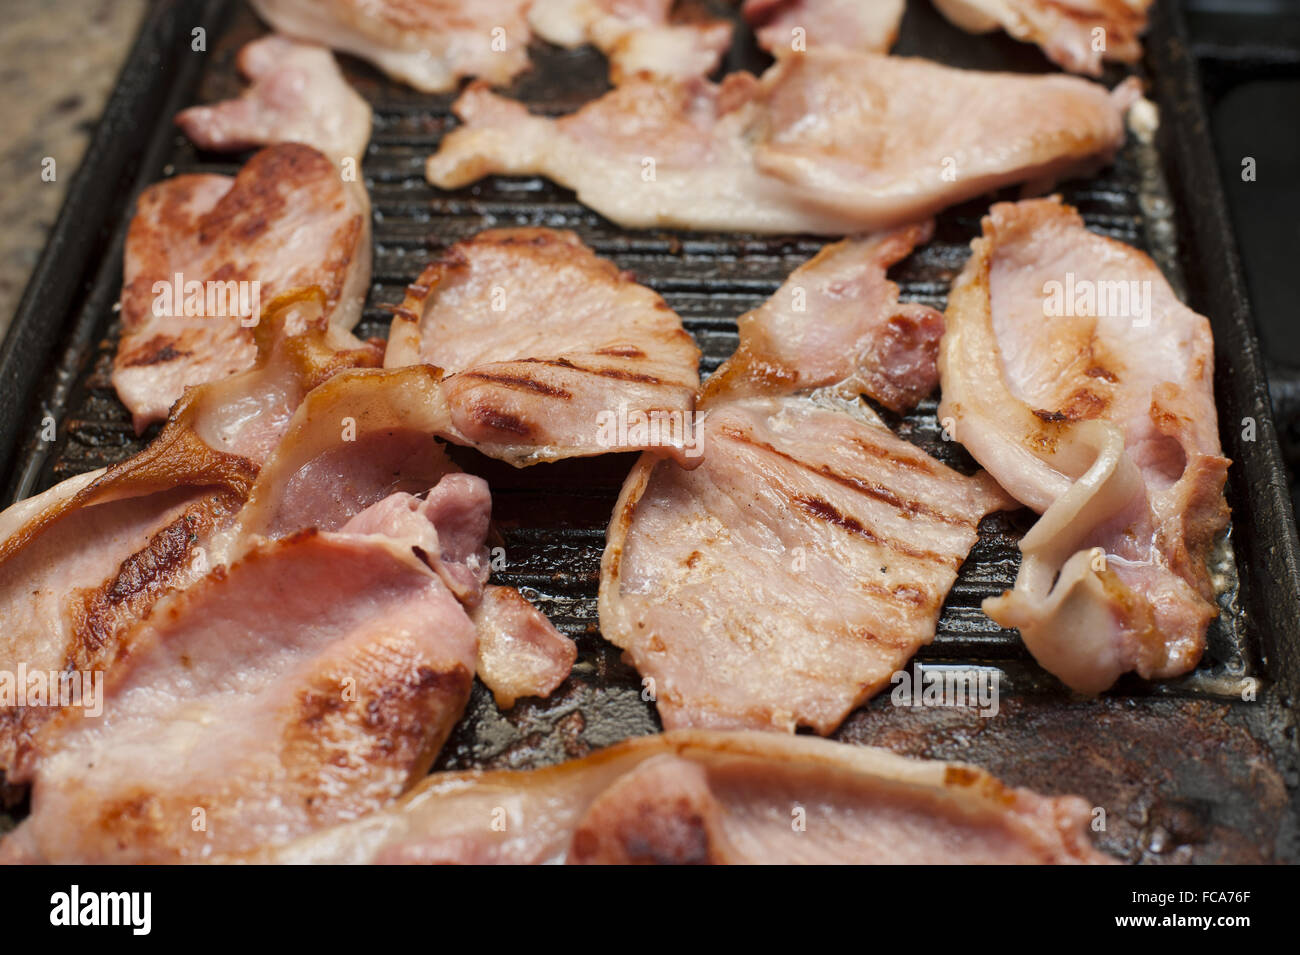 Rashers of smoked bacon on a griddle Stock Photo